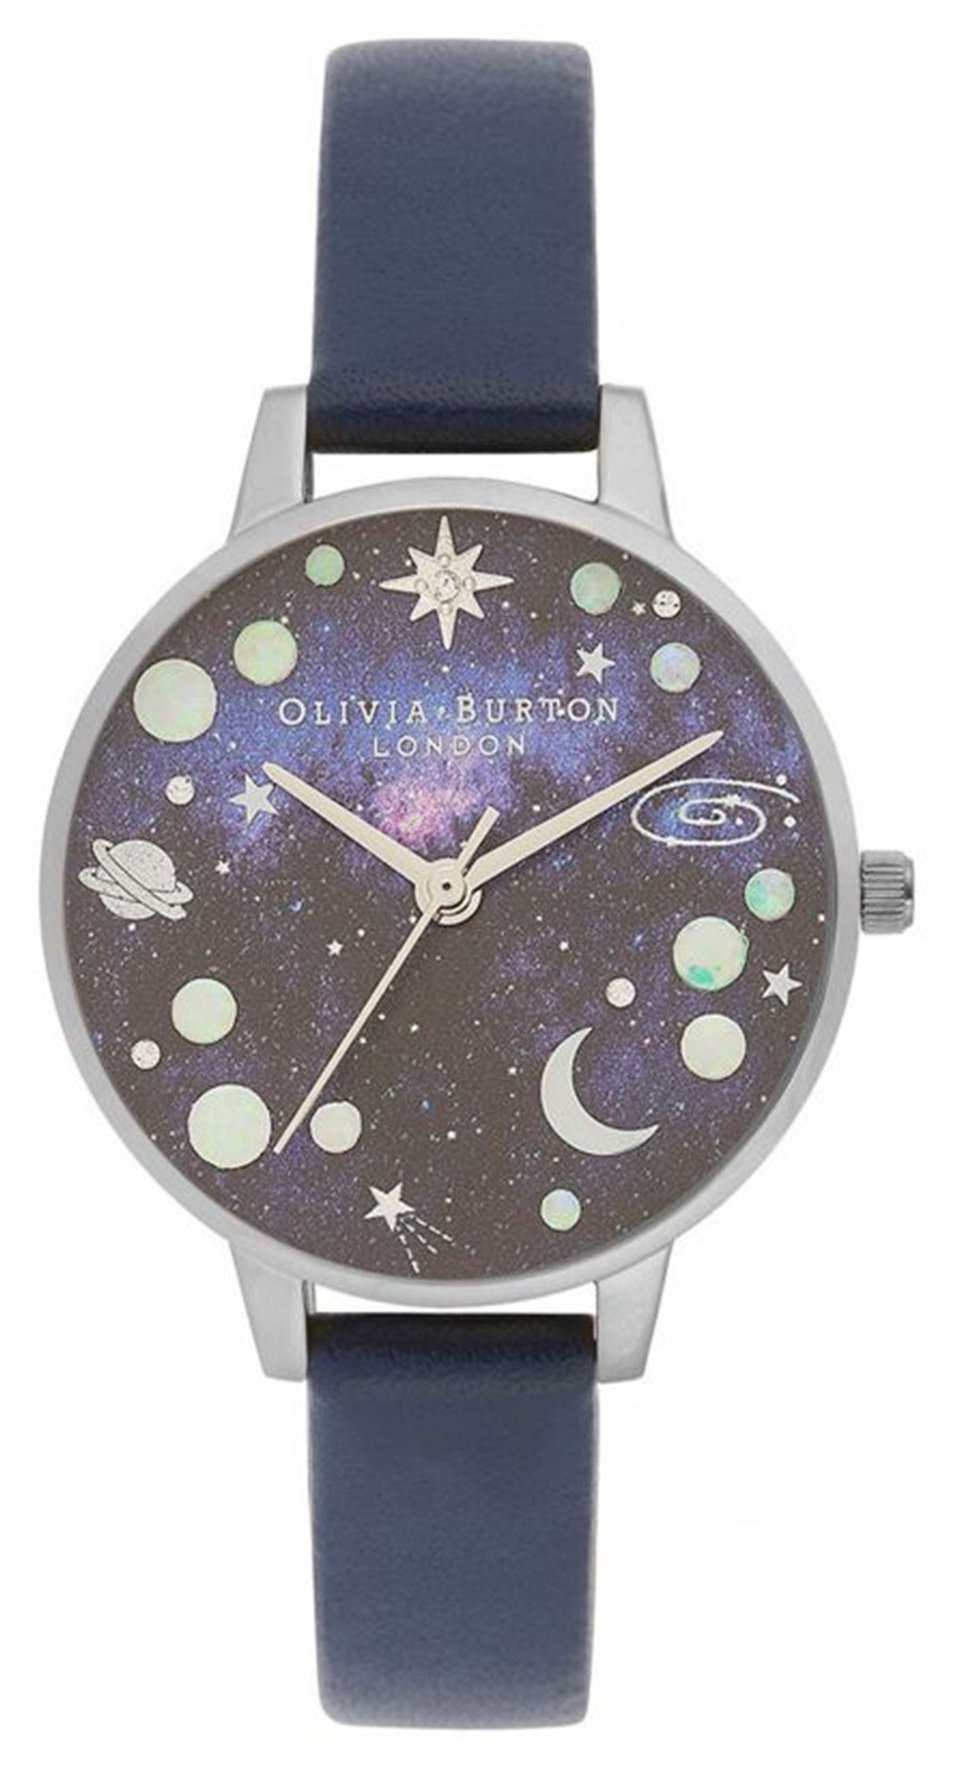 Olivia Burton's New Celestial Watches - First Class Watches Blog